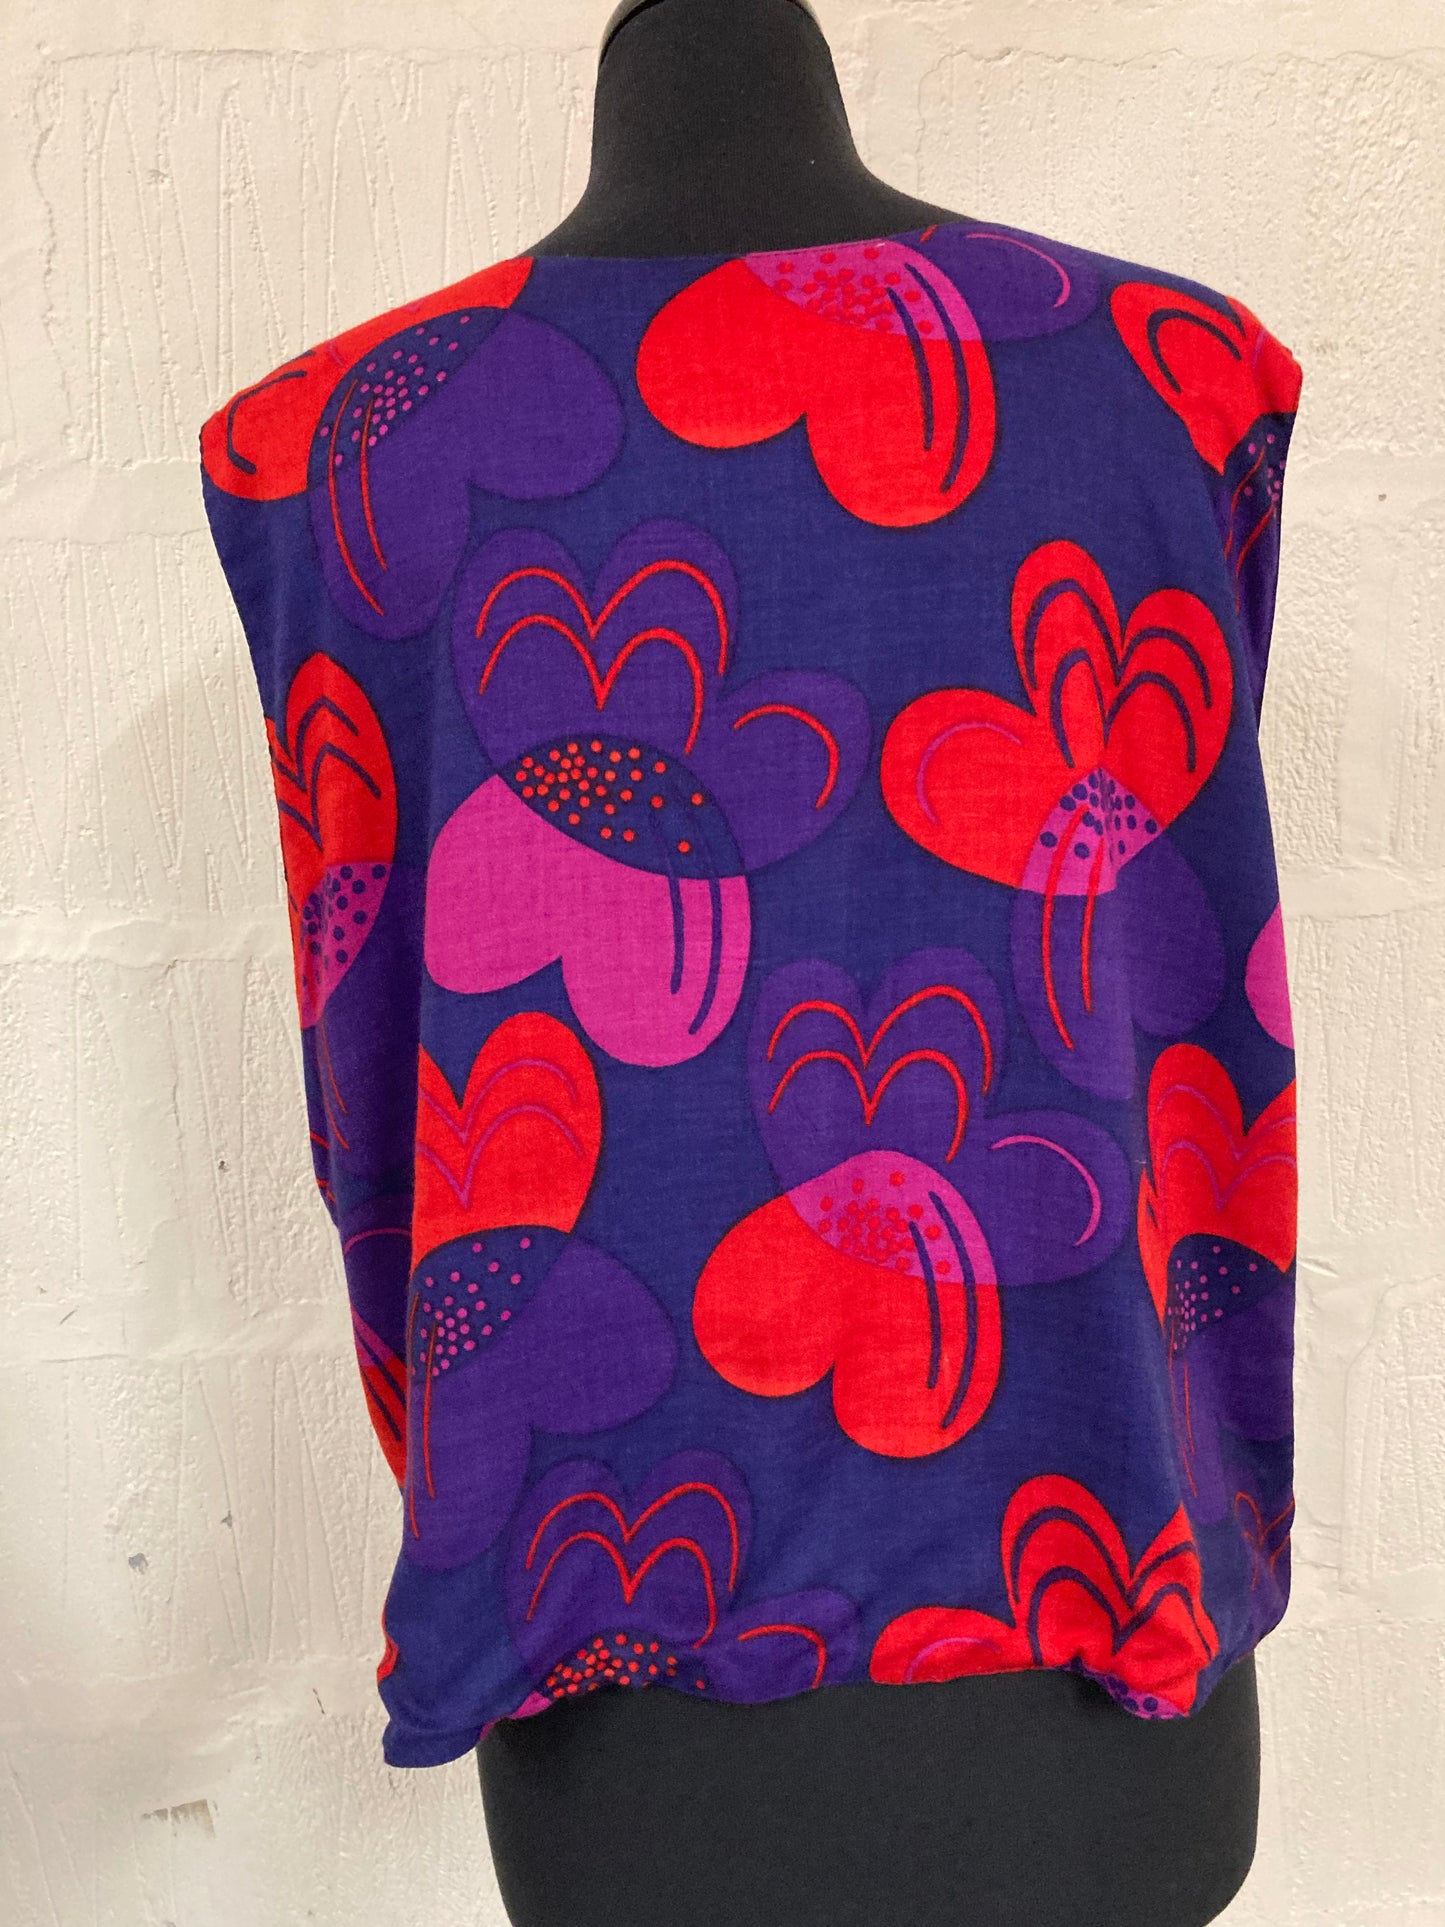 BNWT Purple and Red Reversible Waistcoat Size 18